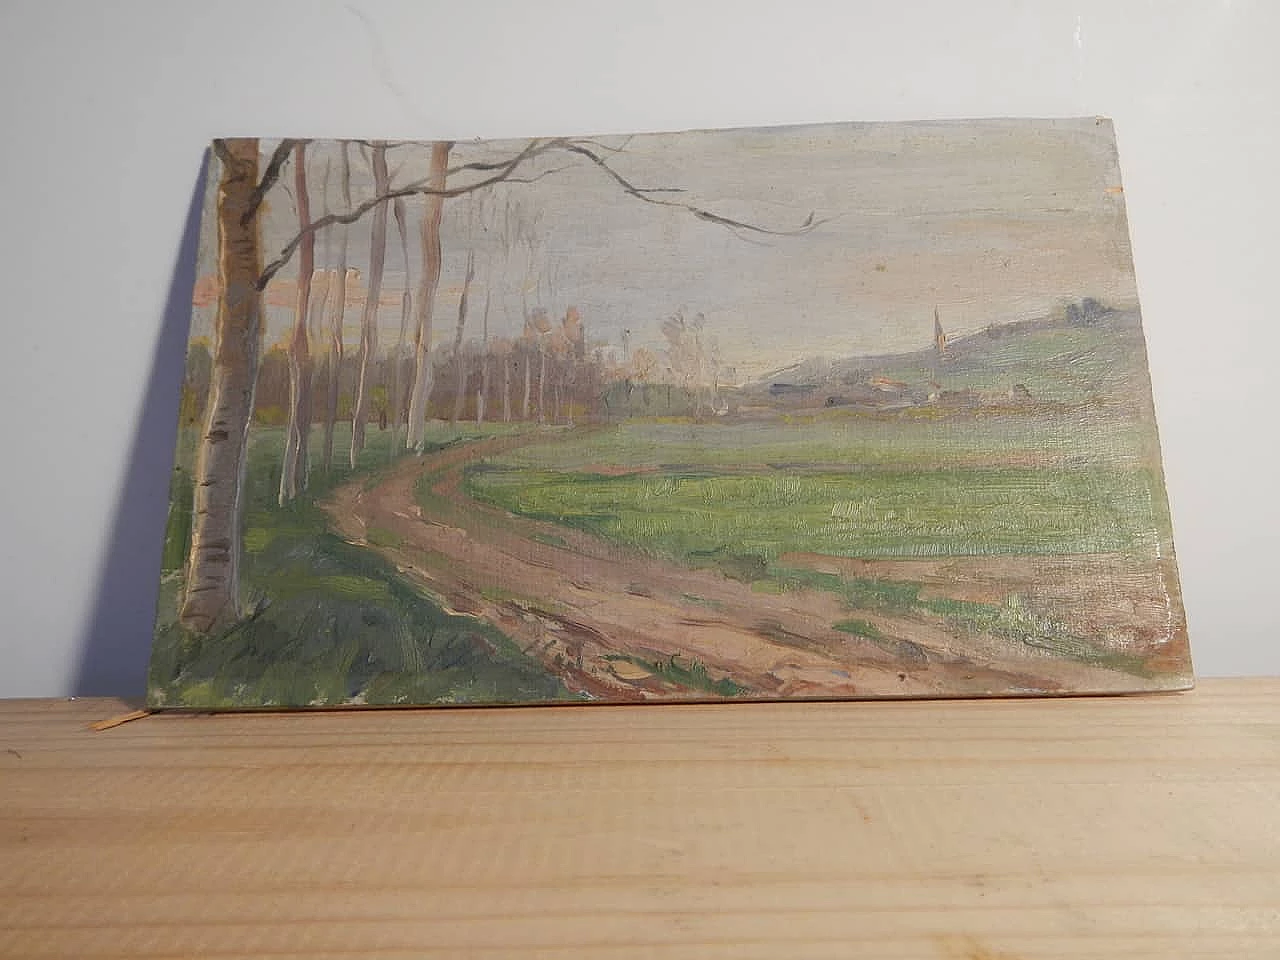 Des Champs, road, painting on wood, early 20th century 11